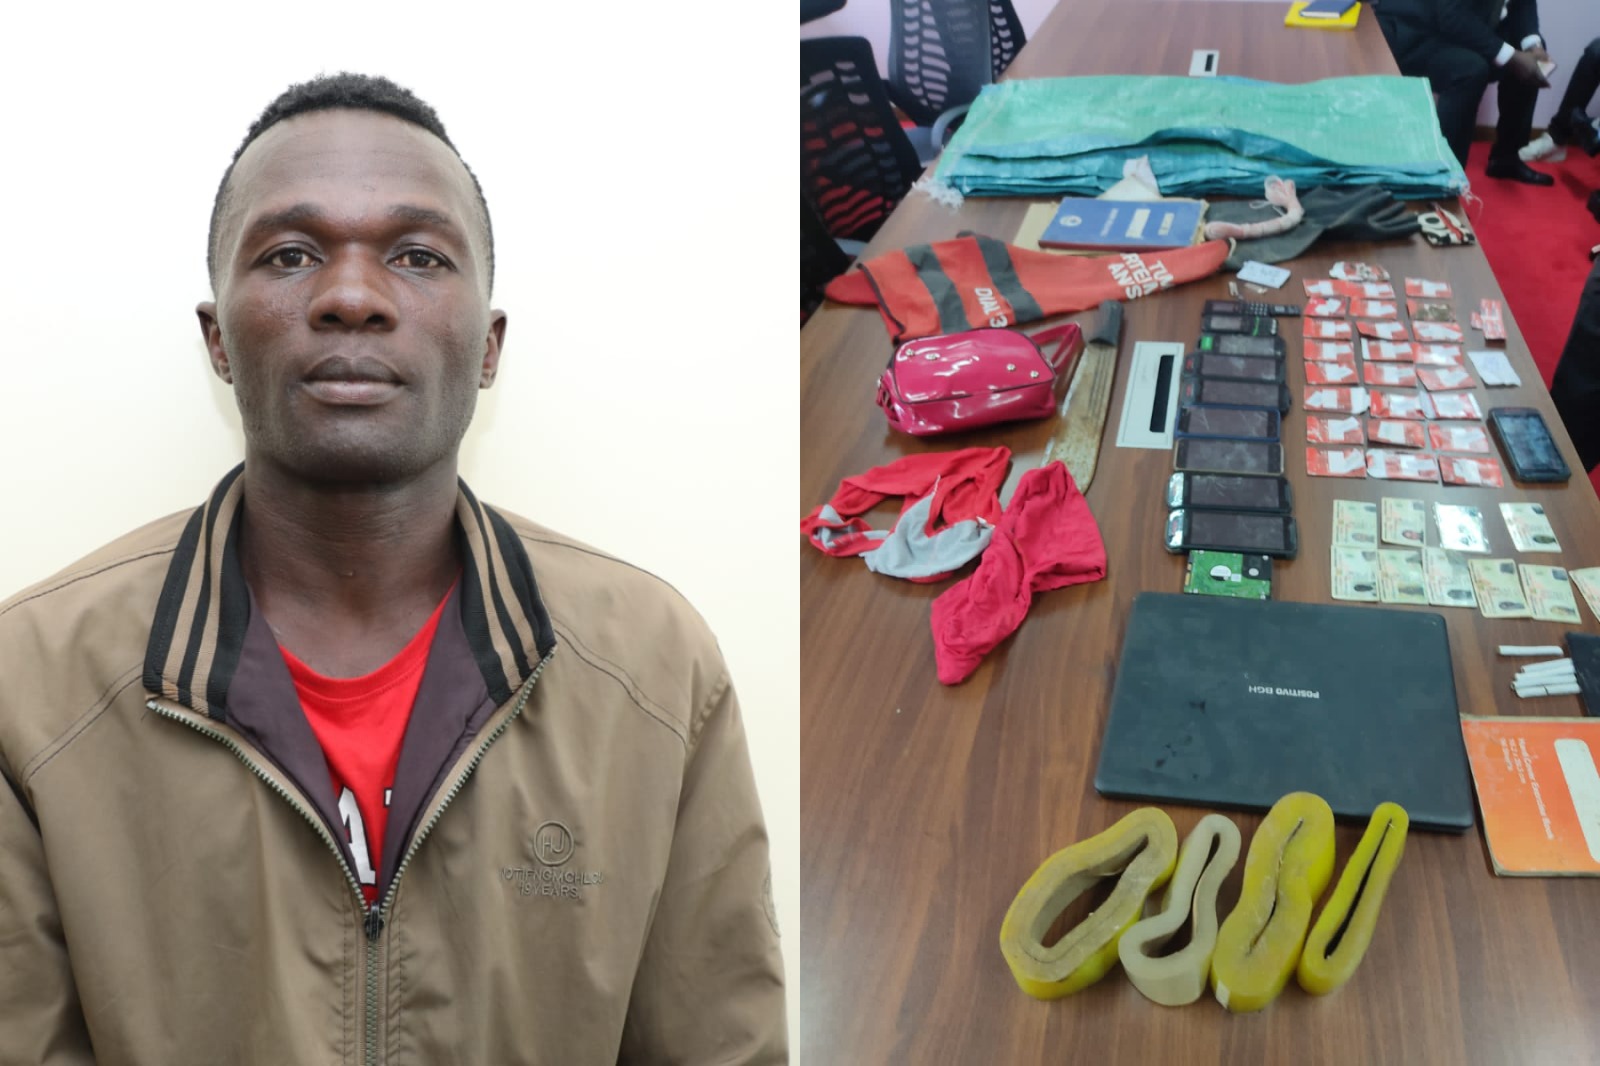 Photo collage of main suspected in Mukuru Kwa Njenga deaths and items recovered in his house.